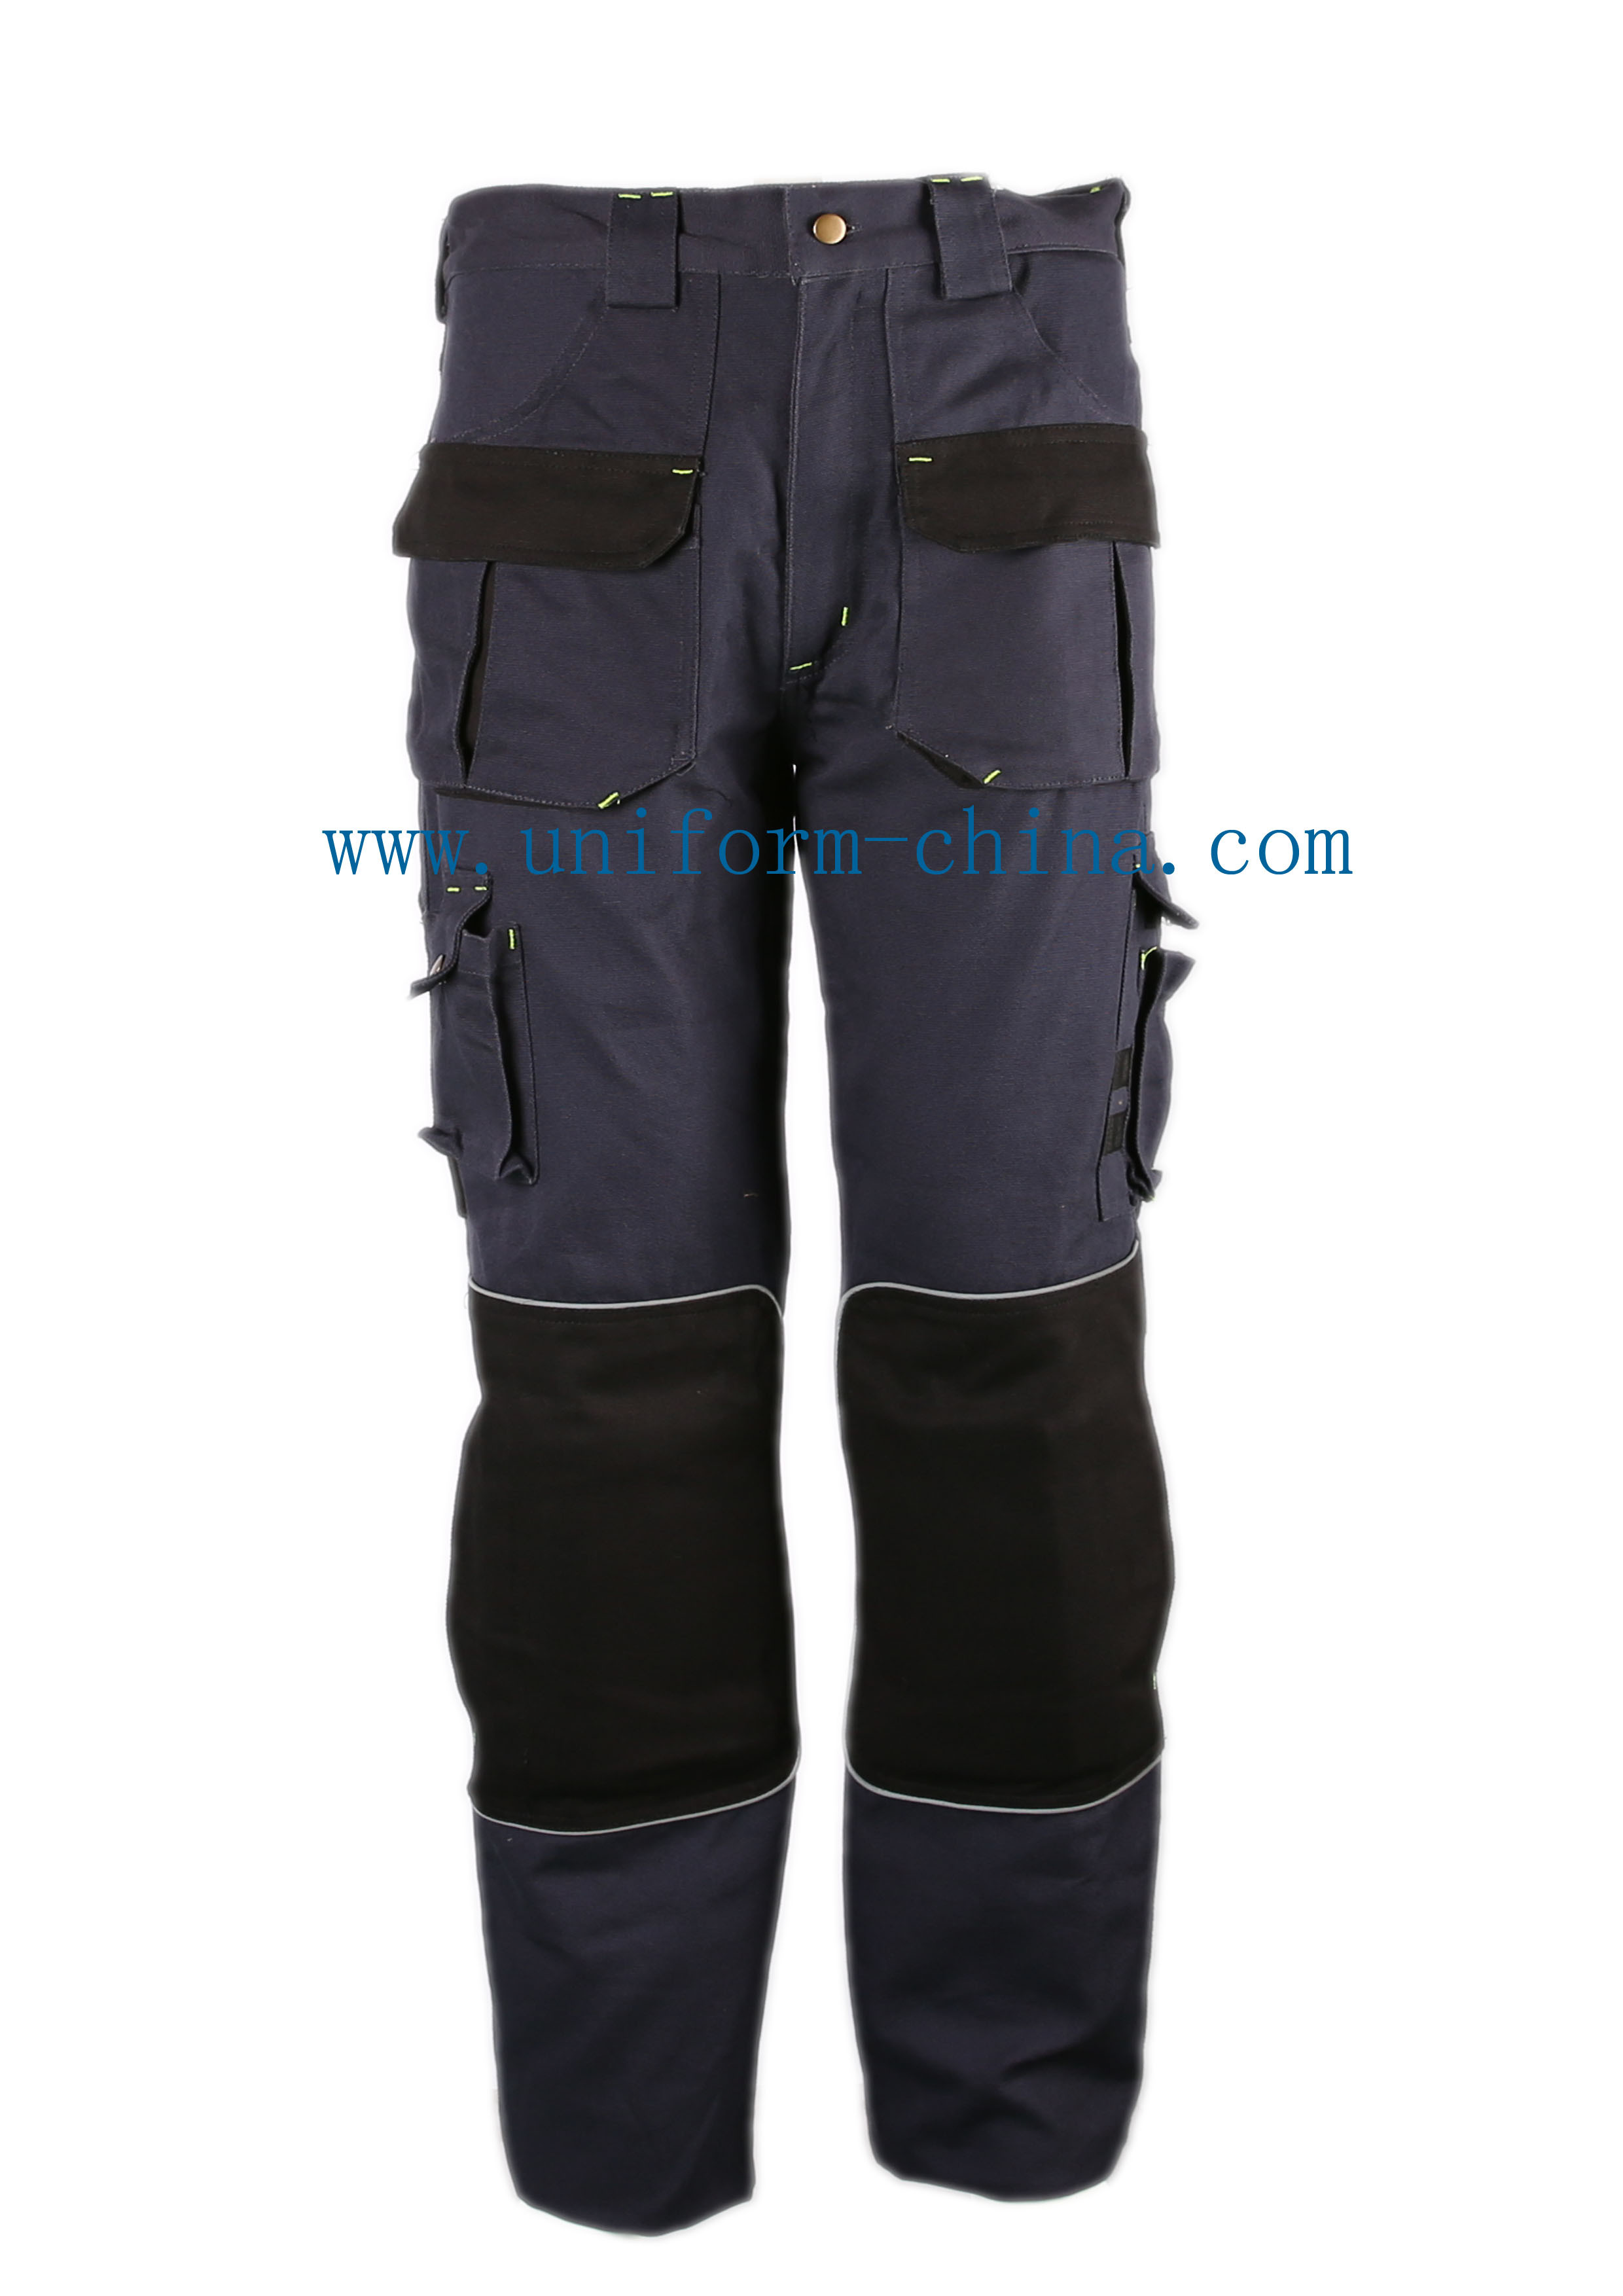 Men's Cotton Safety Cargo Work Pants Workwear Working Trousers